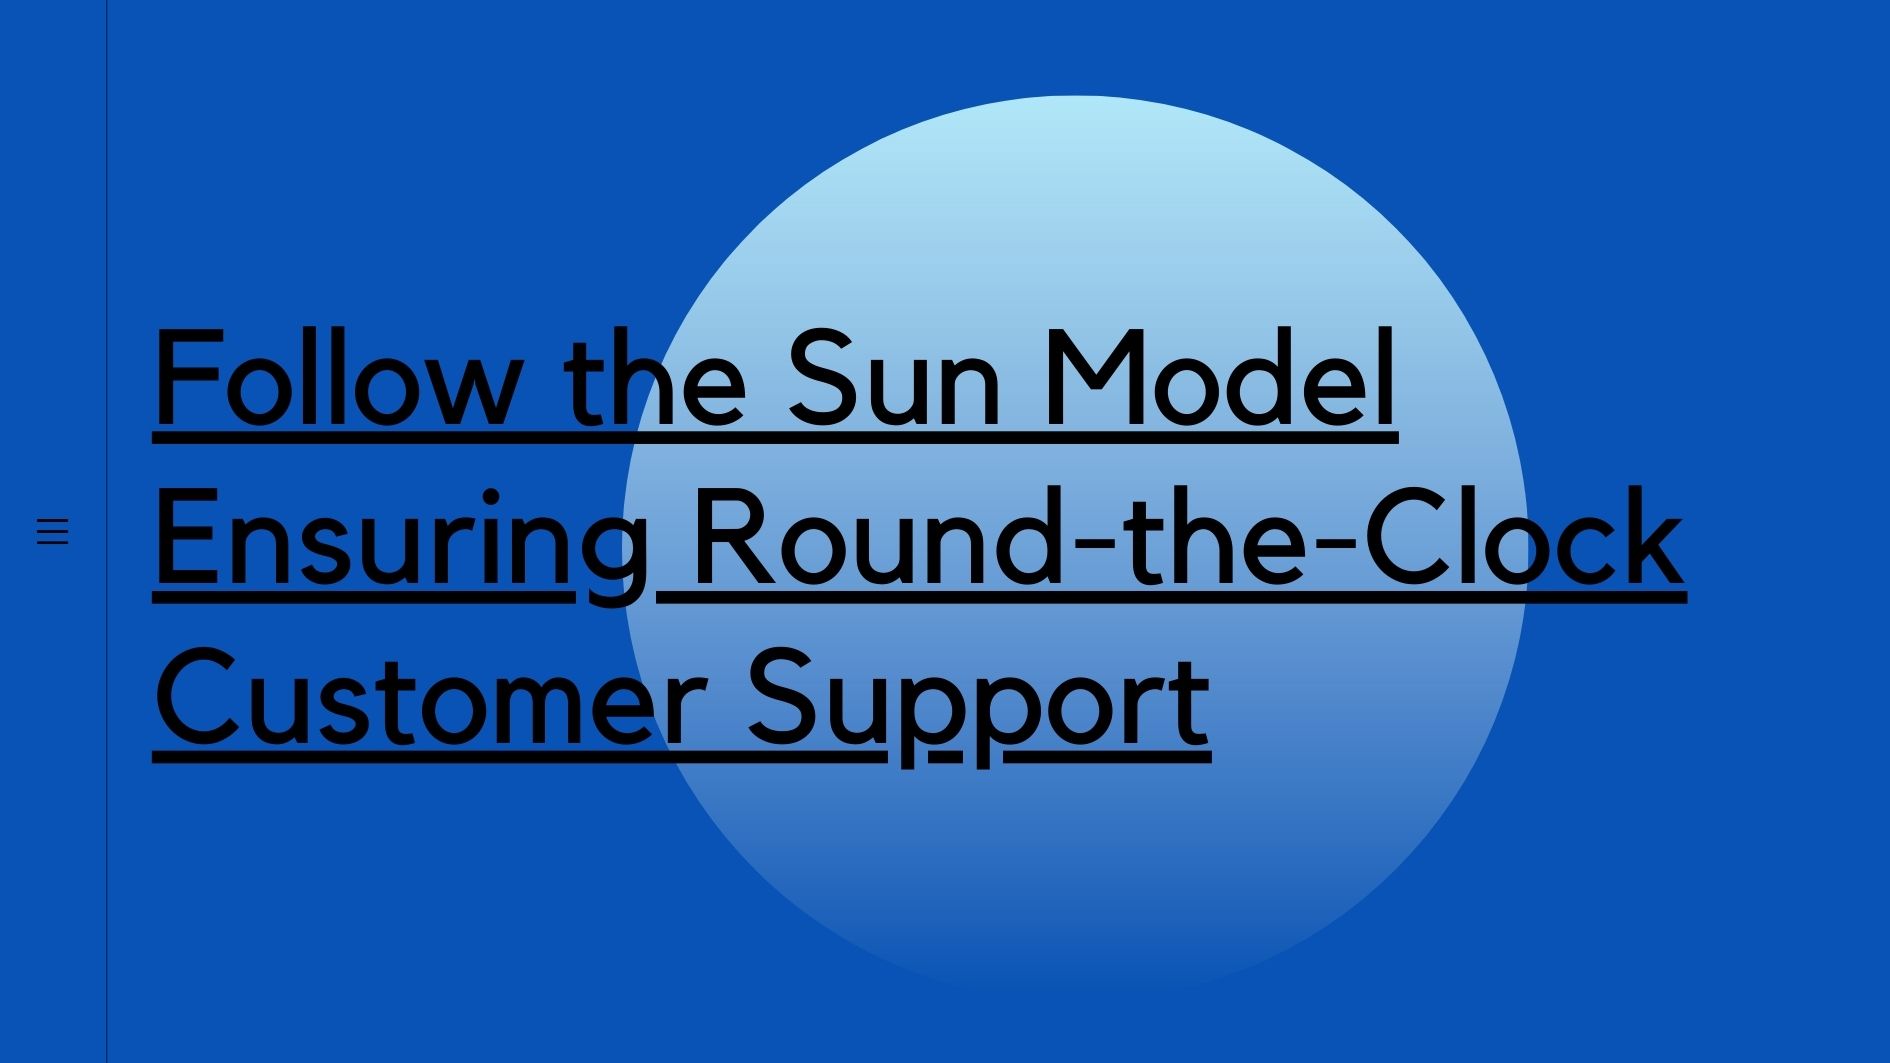 Follow the Sun Model Ensuring Round-the-Clock Customer Support